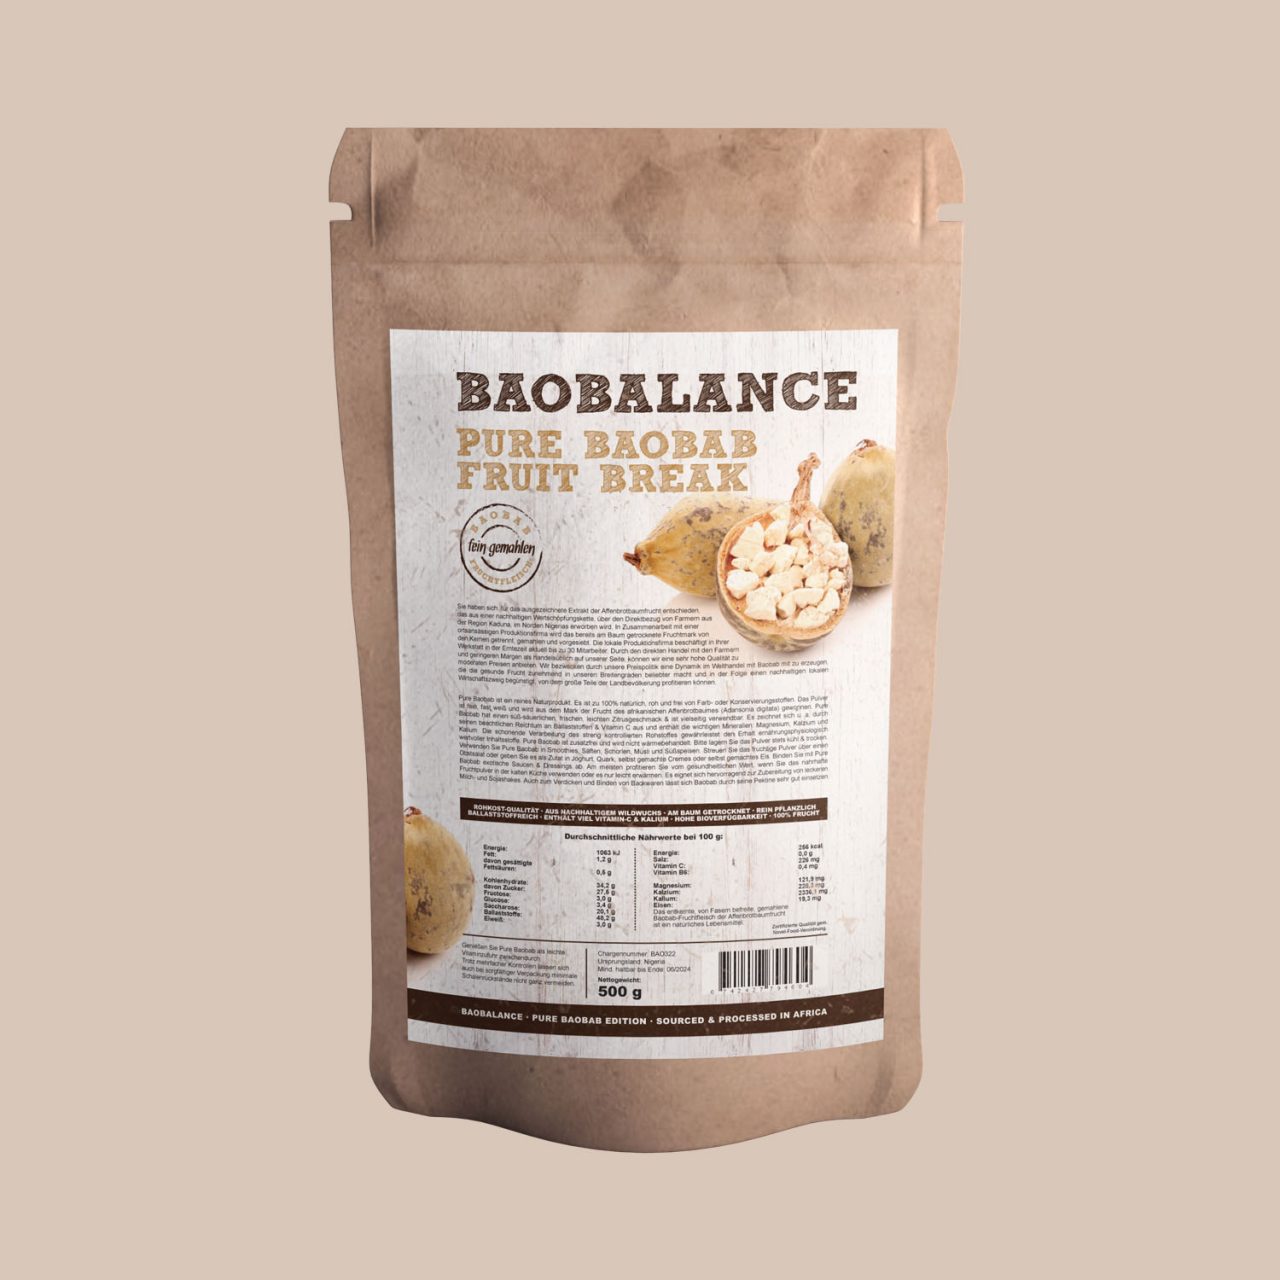 Product Label Design For Dried Fruit Baobab From Nigeria, Africa